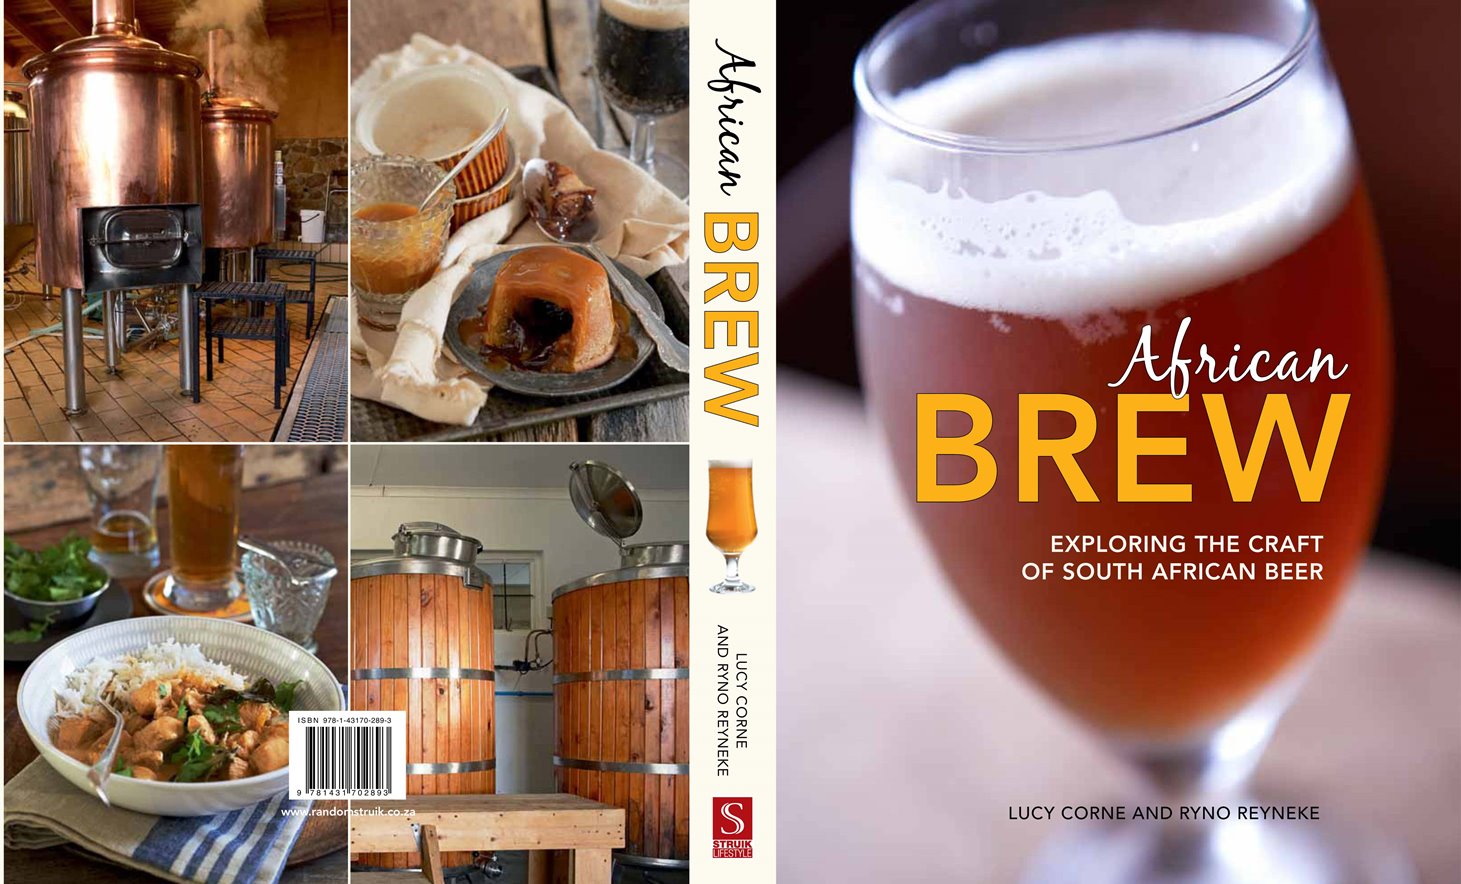 African Brew – will there be a second edition?